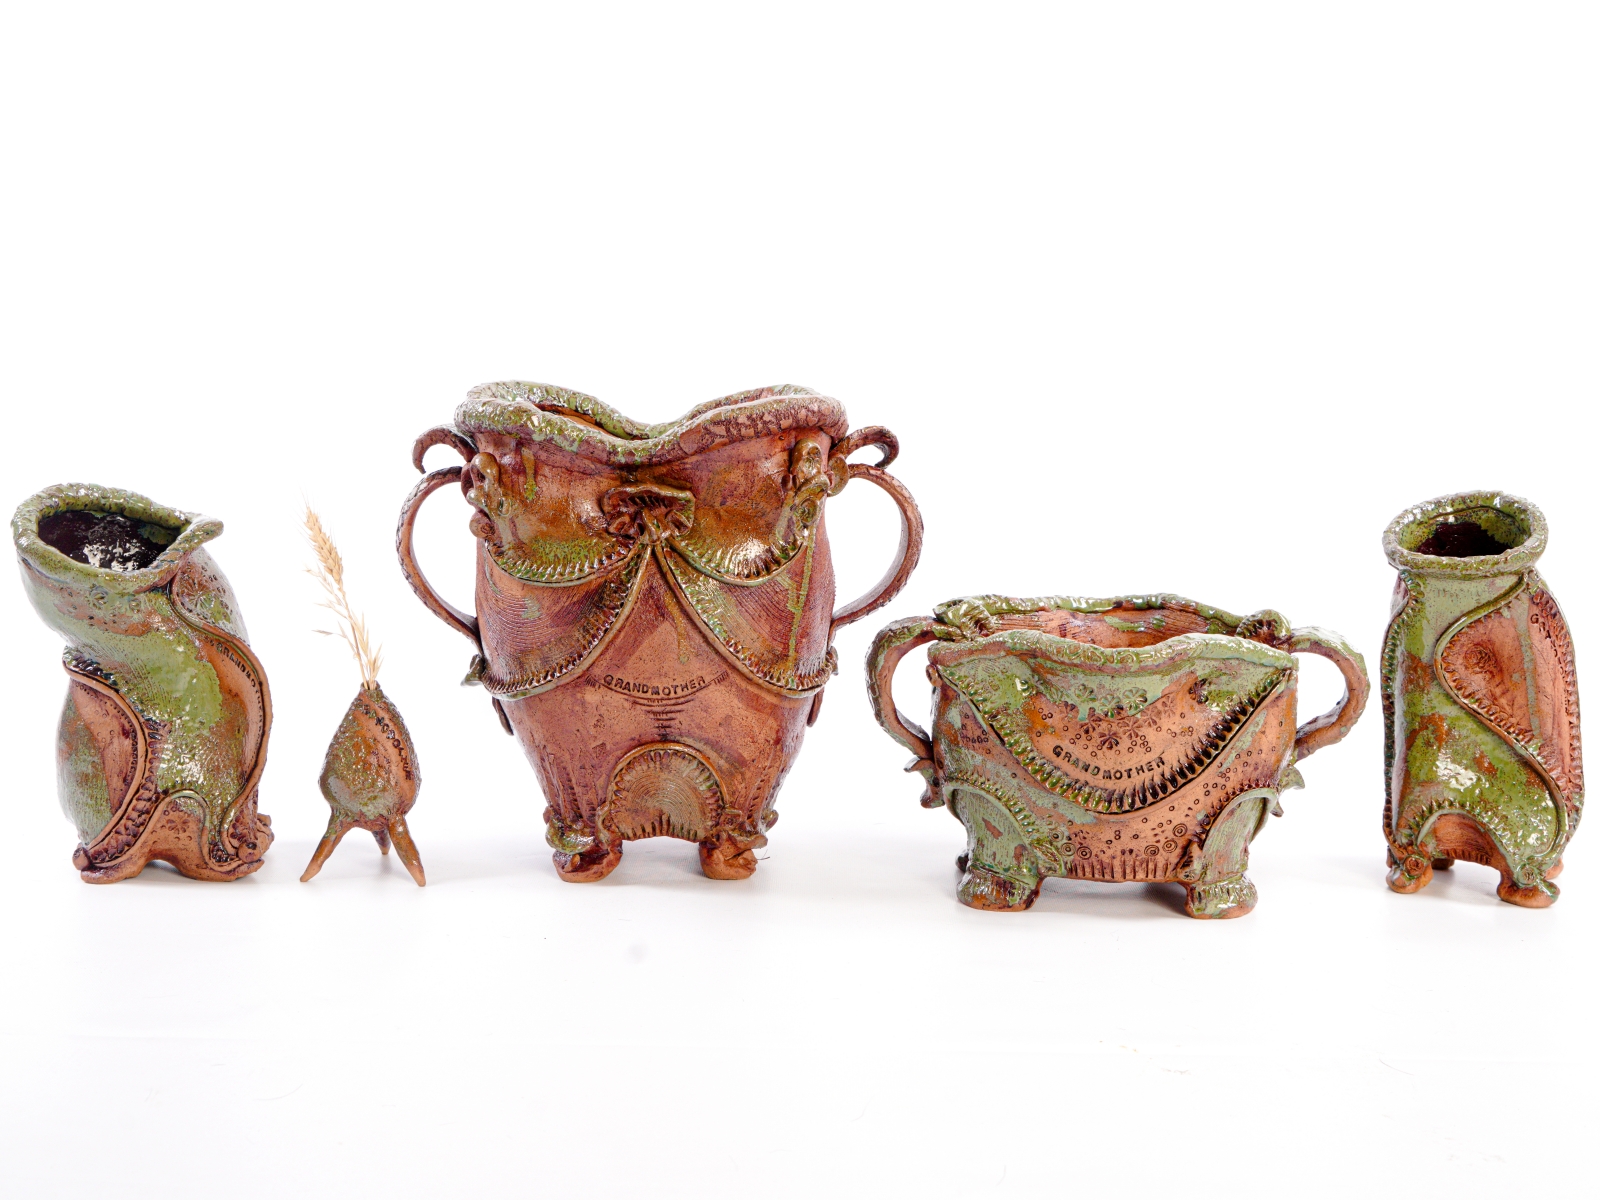 Image shows a series of ceramic vases in tribute to her grandmother by the artist Lee-Anne Peters for her Exhibition News Lee-Anne Peters Solo Exhibition Initiation Into the Unknown Art Trails Tasmania